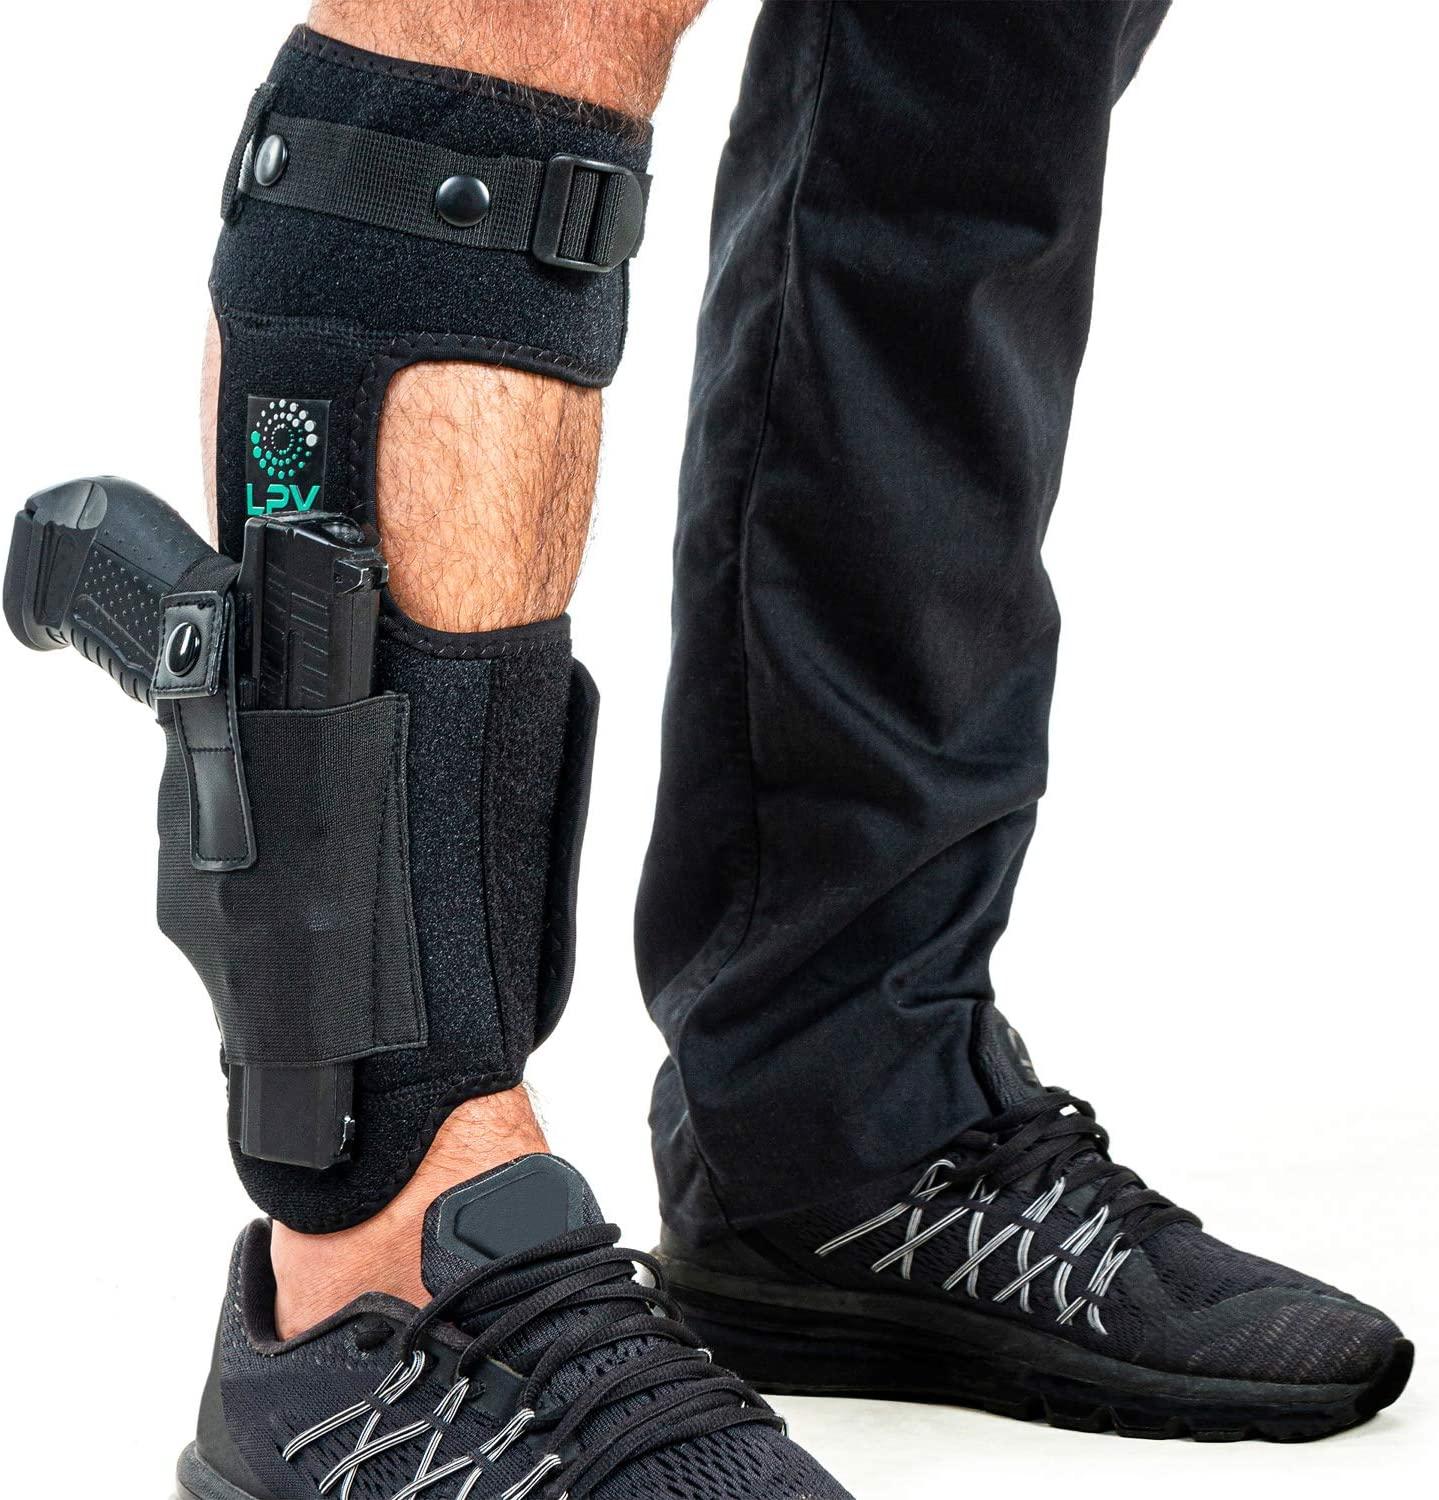 Ankle Holster For Concealed Carry, Conceal Holster Upgraded Version